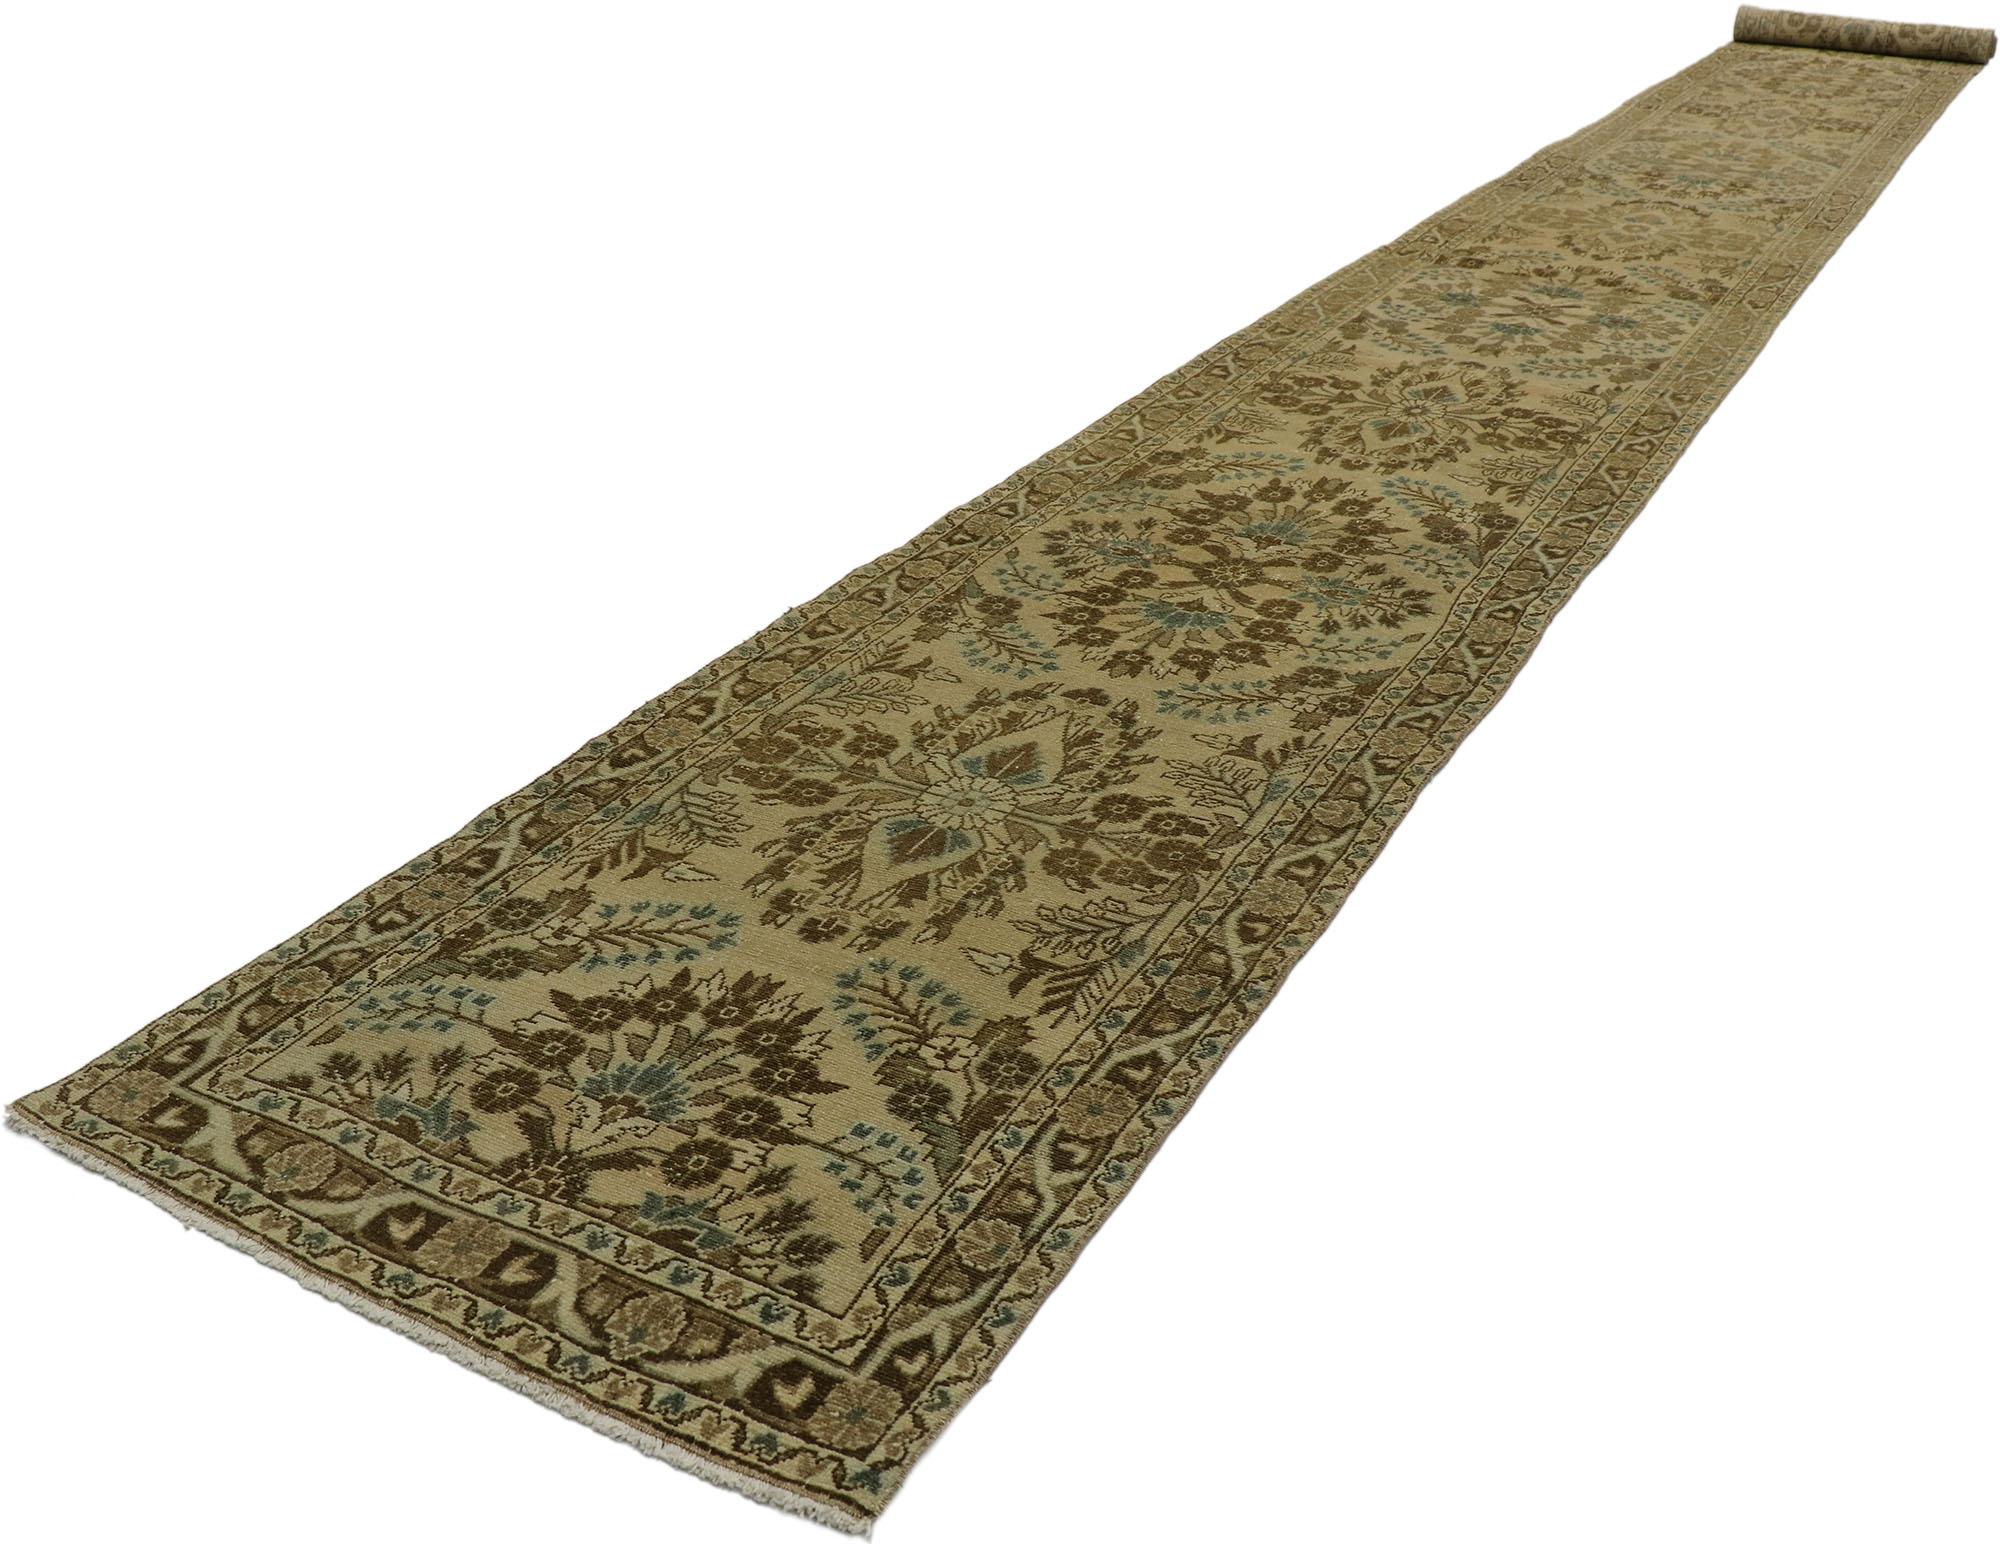 53164, vintage Persian Hamadan runner with Amish Shaker style. Warm and inviting, this hand-knotted vintage Persian Hamadan runner beautifully embodies an Amish Shaker style. The abrashed tan field is covered in an all-over dense floral pattern